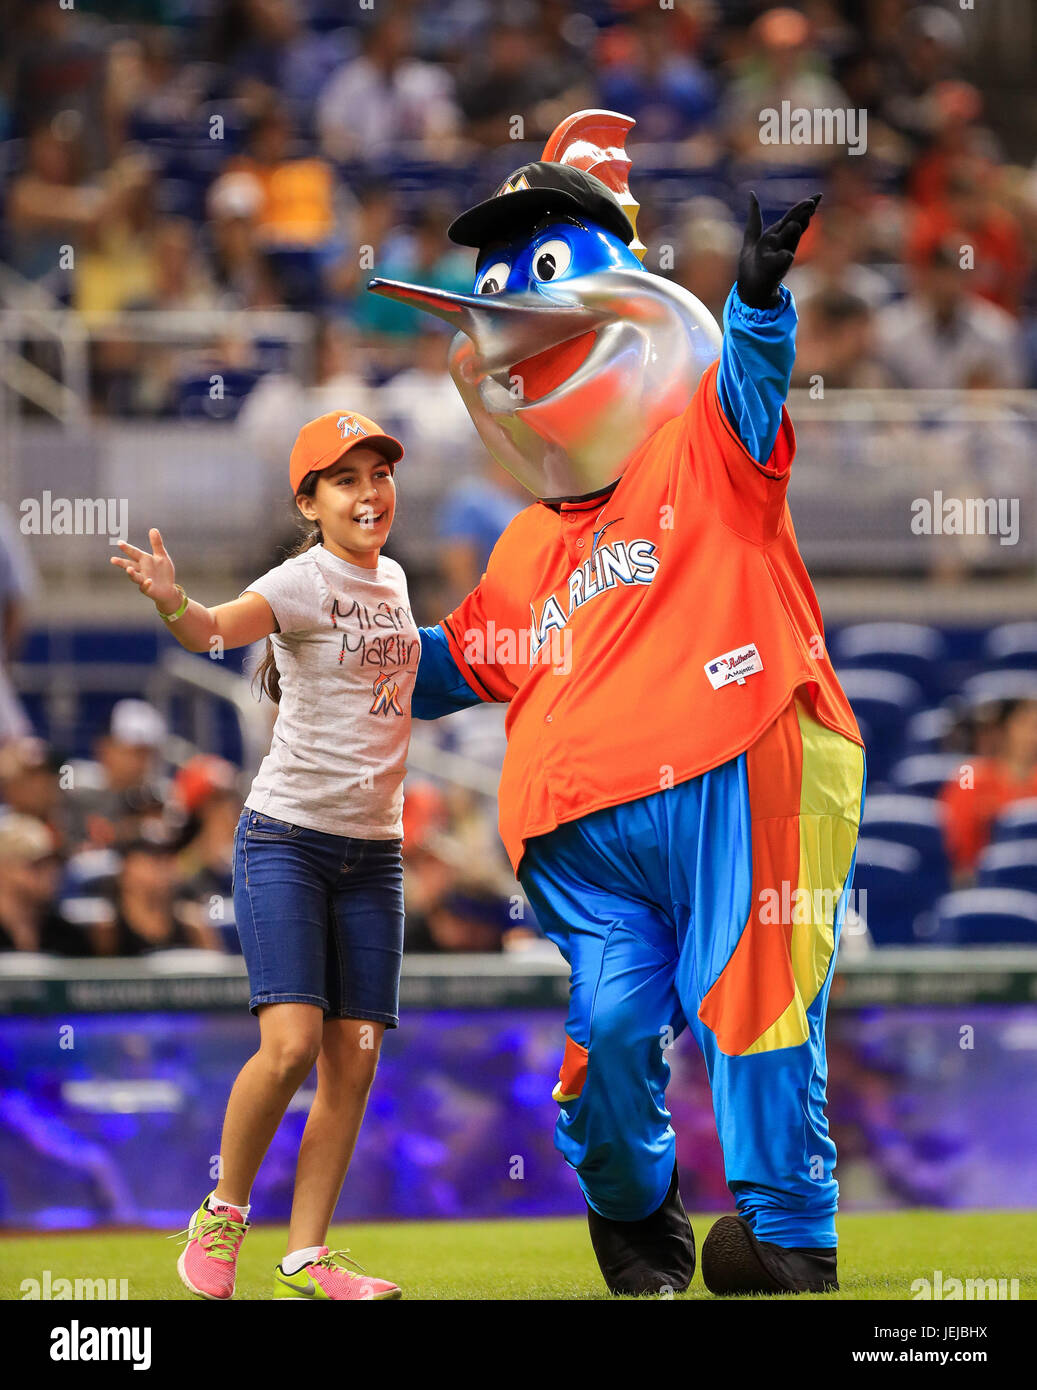 Hero mascot Billy the Marlin dives onto pavement for foul ball, delivers to  young fan